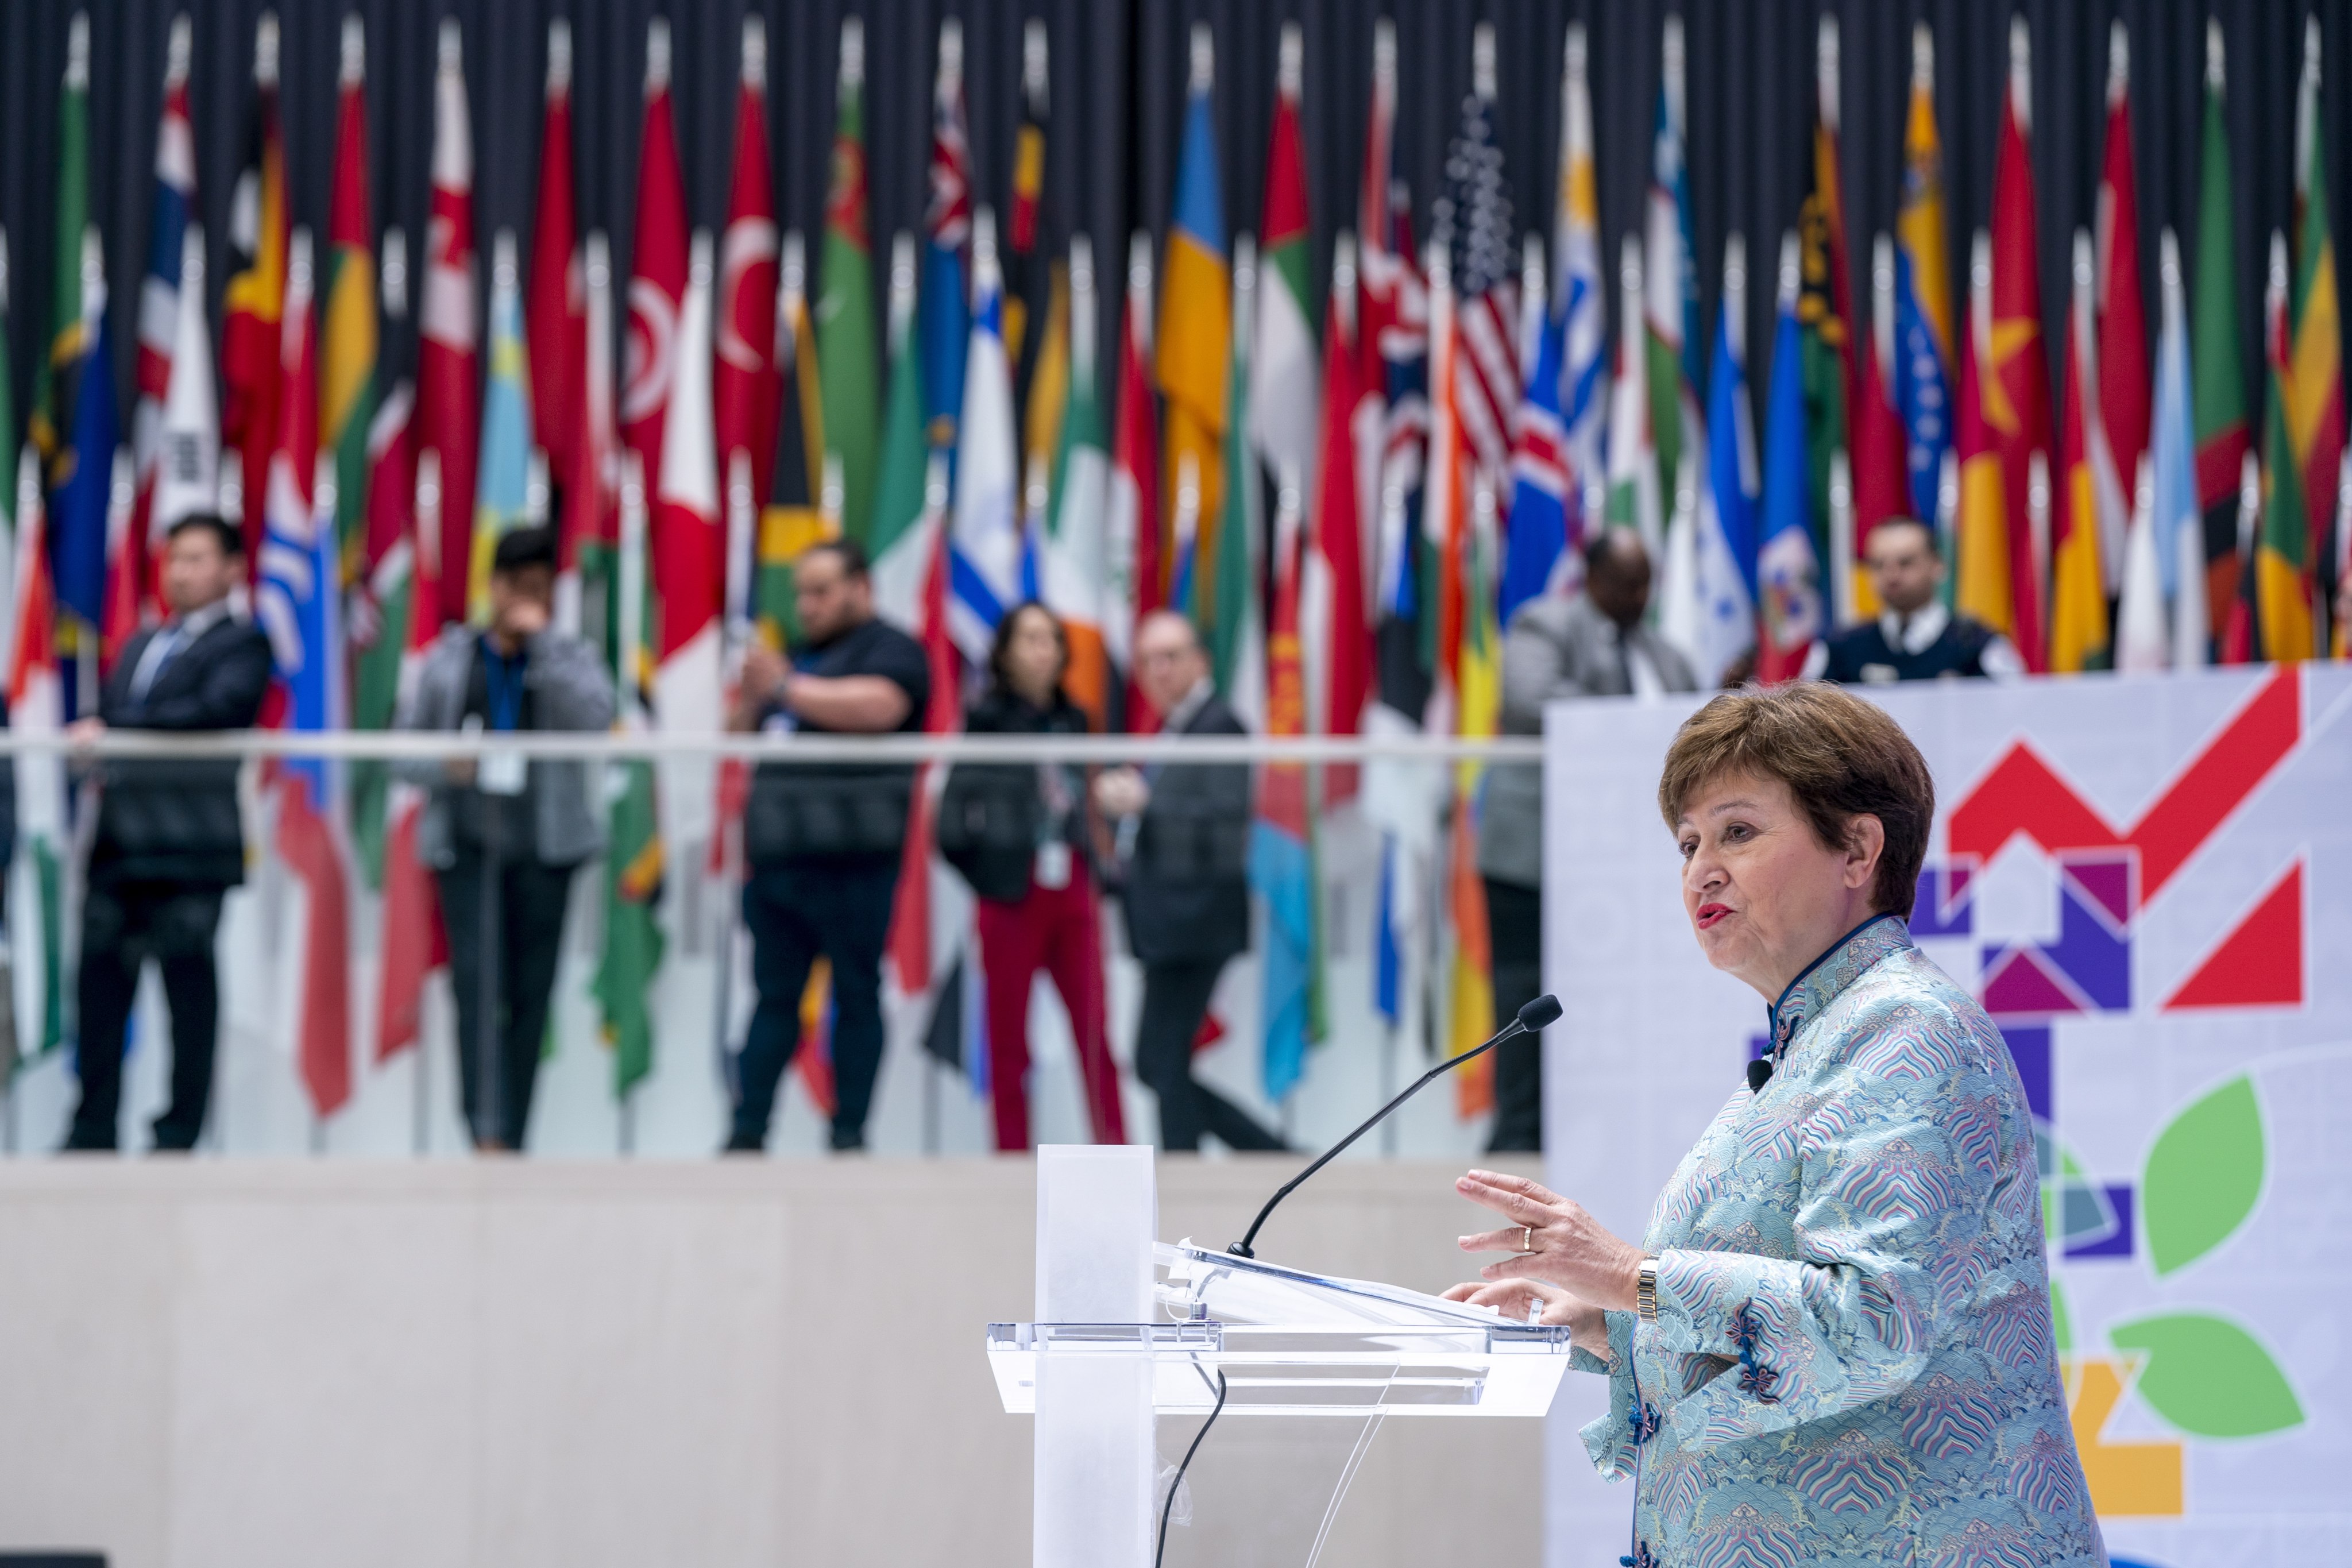 IMF managing director Kristalina Georgieva delivers remarks at the seminar titled “Digital Public Infrastructure: Stacking up the Benefits” during the spring meetings in Washington, on April 14. Photo: EPA-EFE